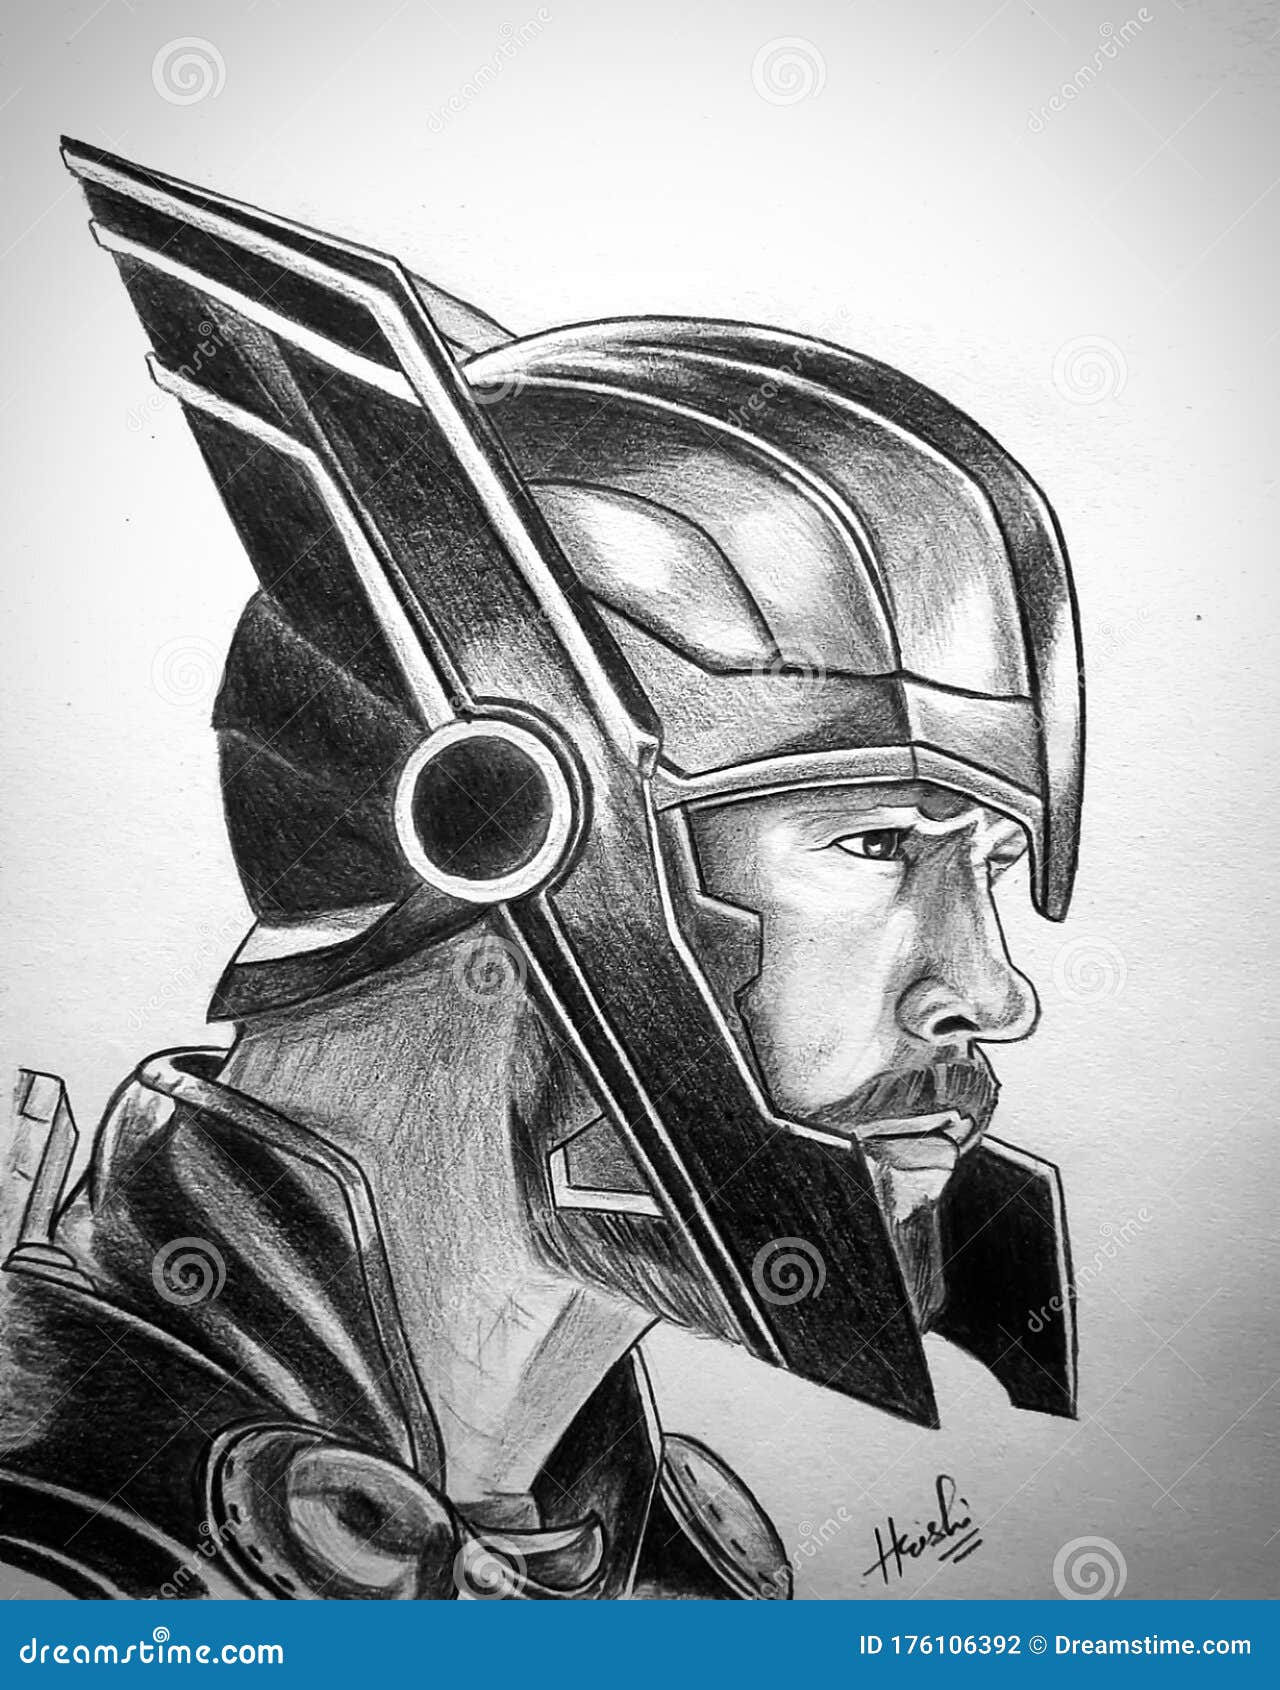 Thor Drawing Tutorial - How to draw Thor step by step